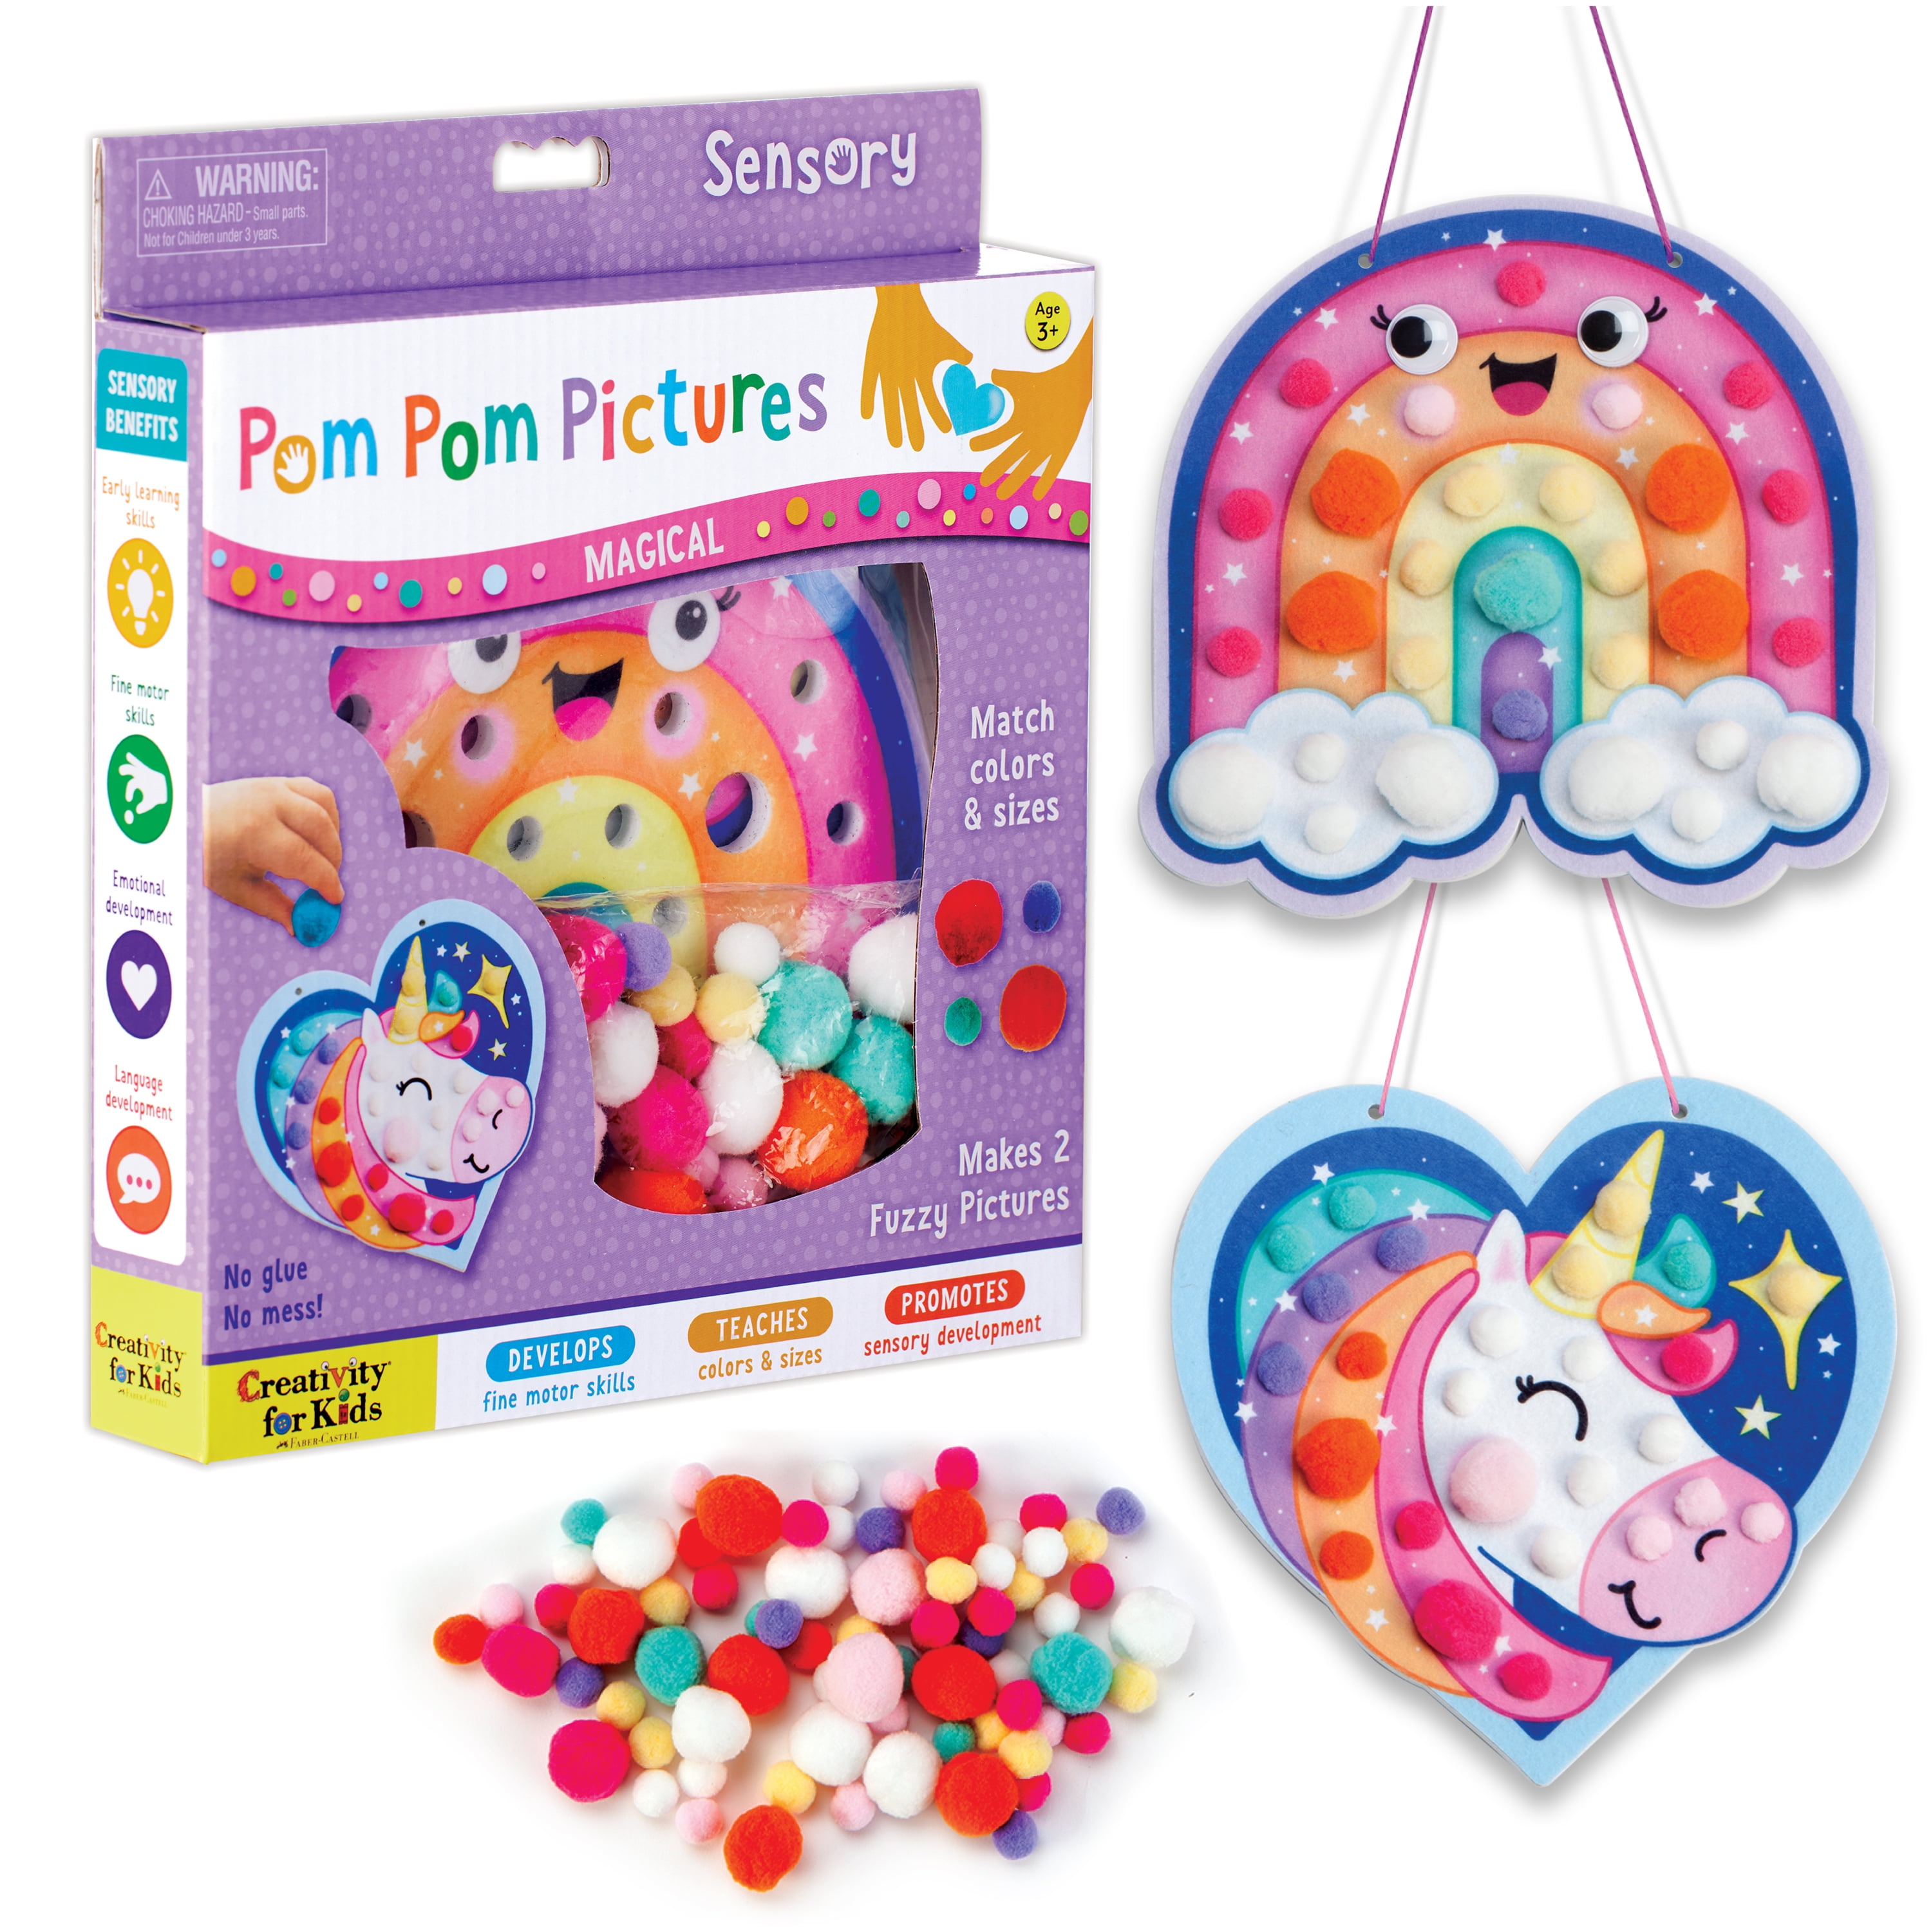 NEW Fashion Plates Deluxe Kit [New Toy] Toy, Arts & Crafts Ages 6+